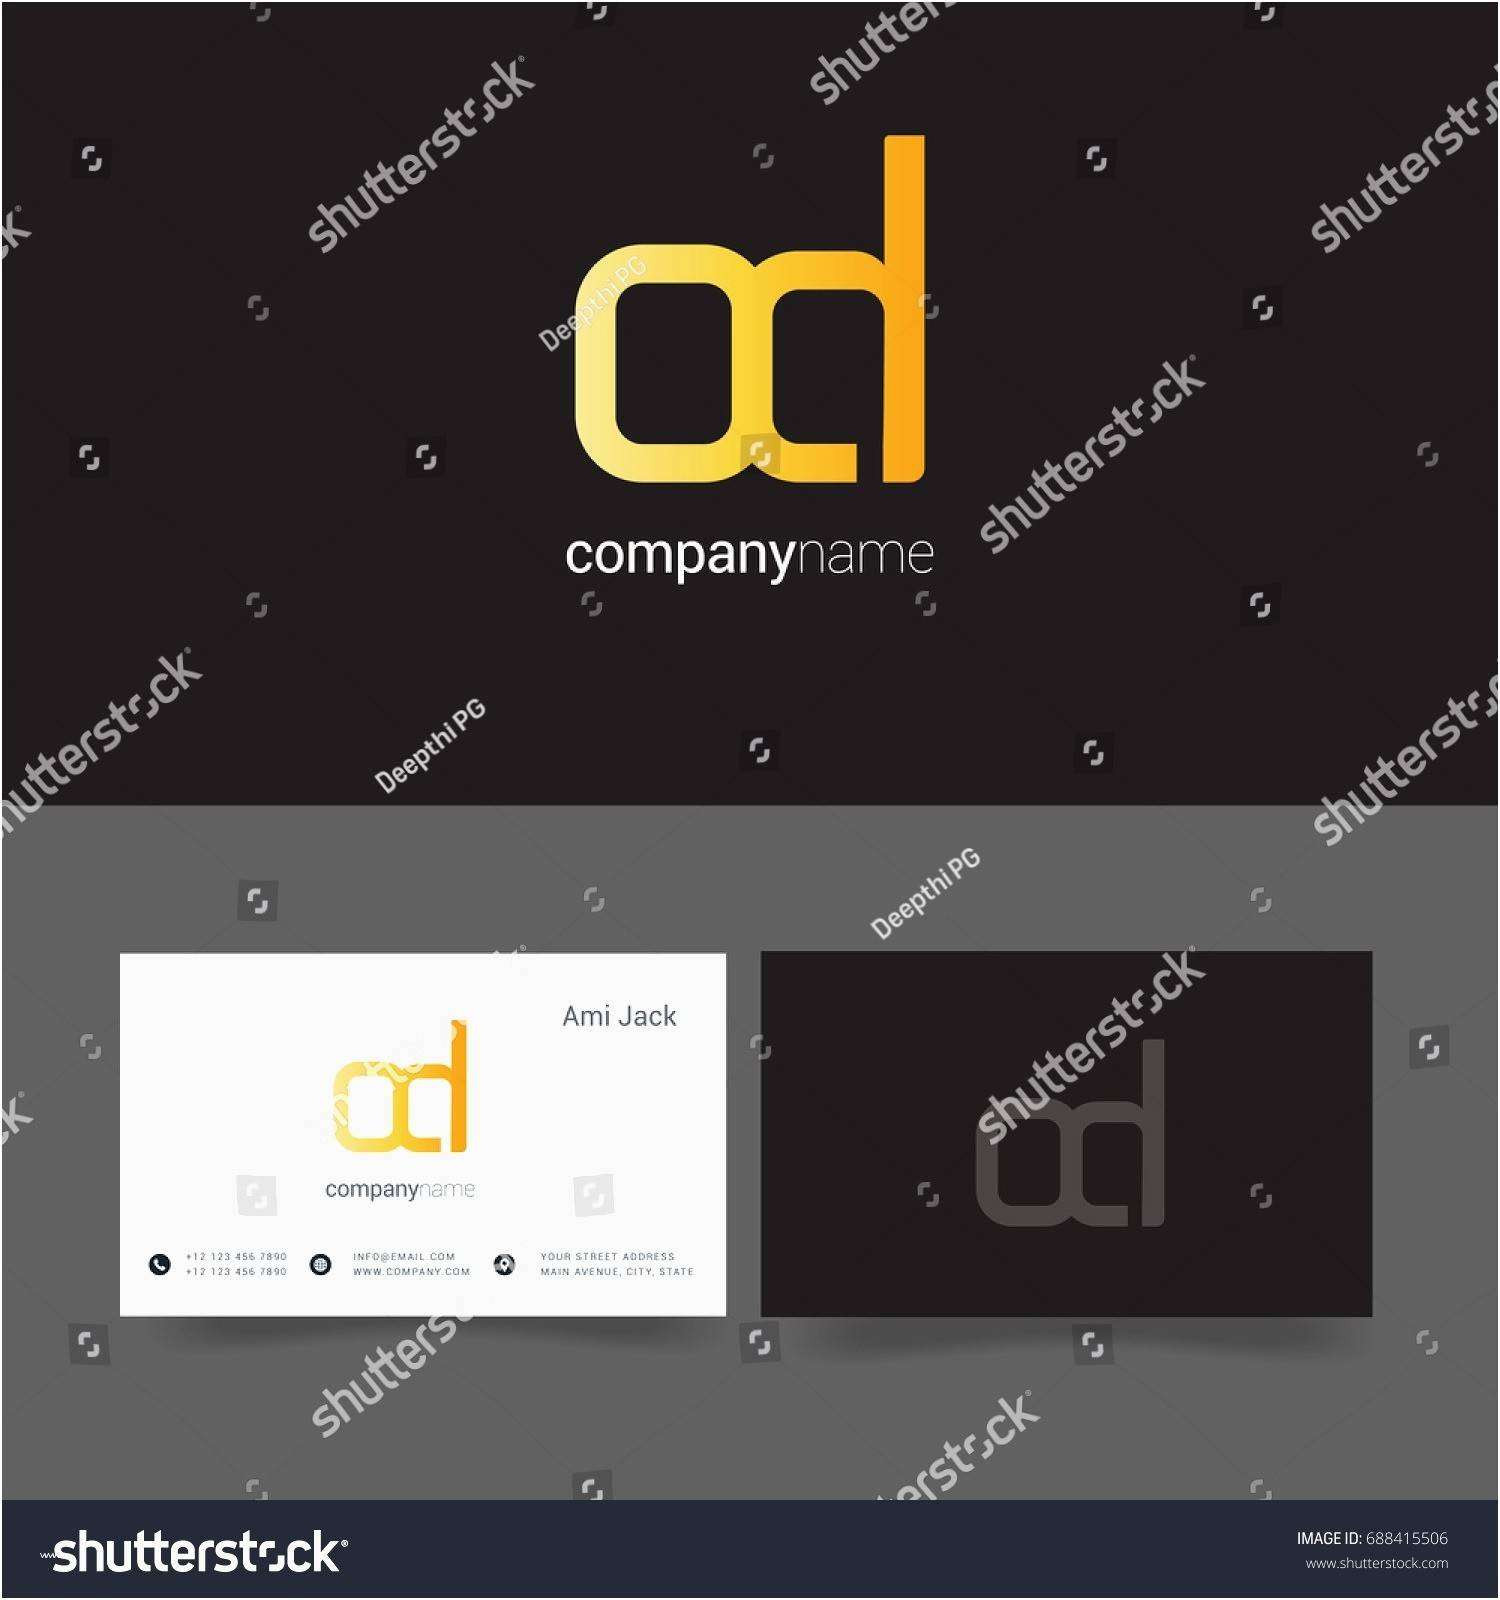 free business card templates elegant awesome gallery free business card template in 2019 business cards of free business card templates